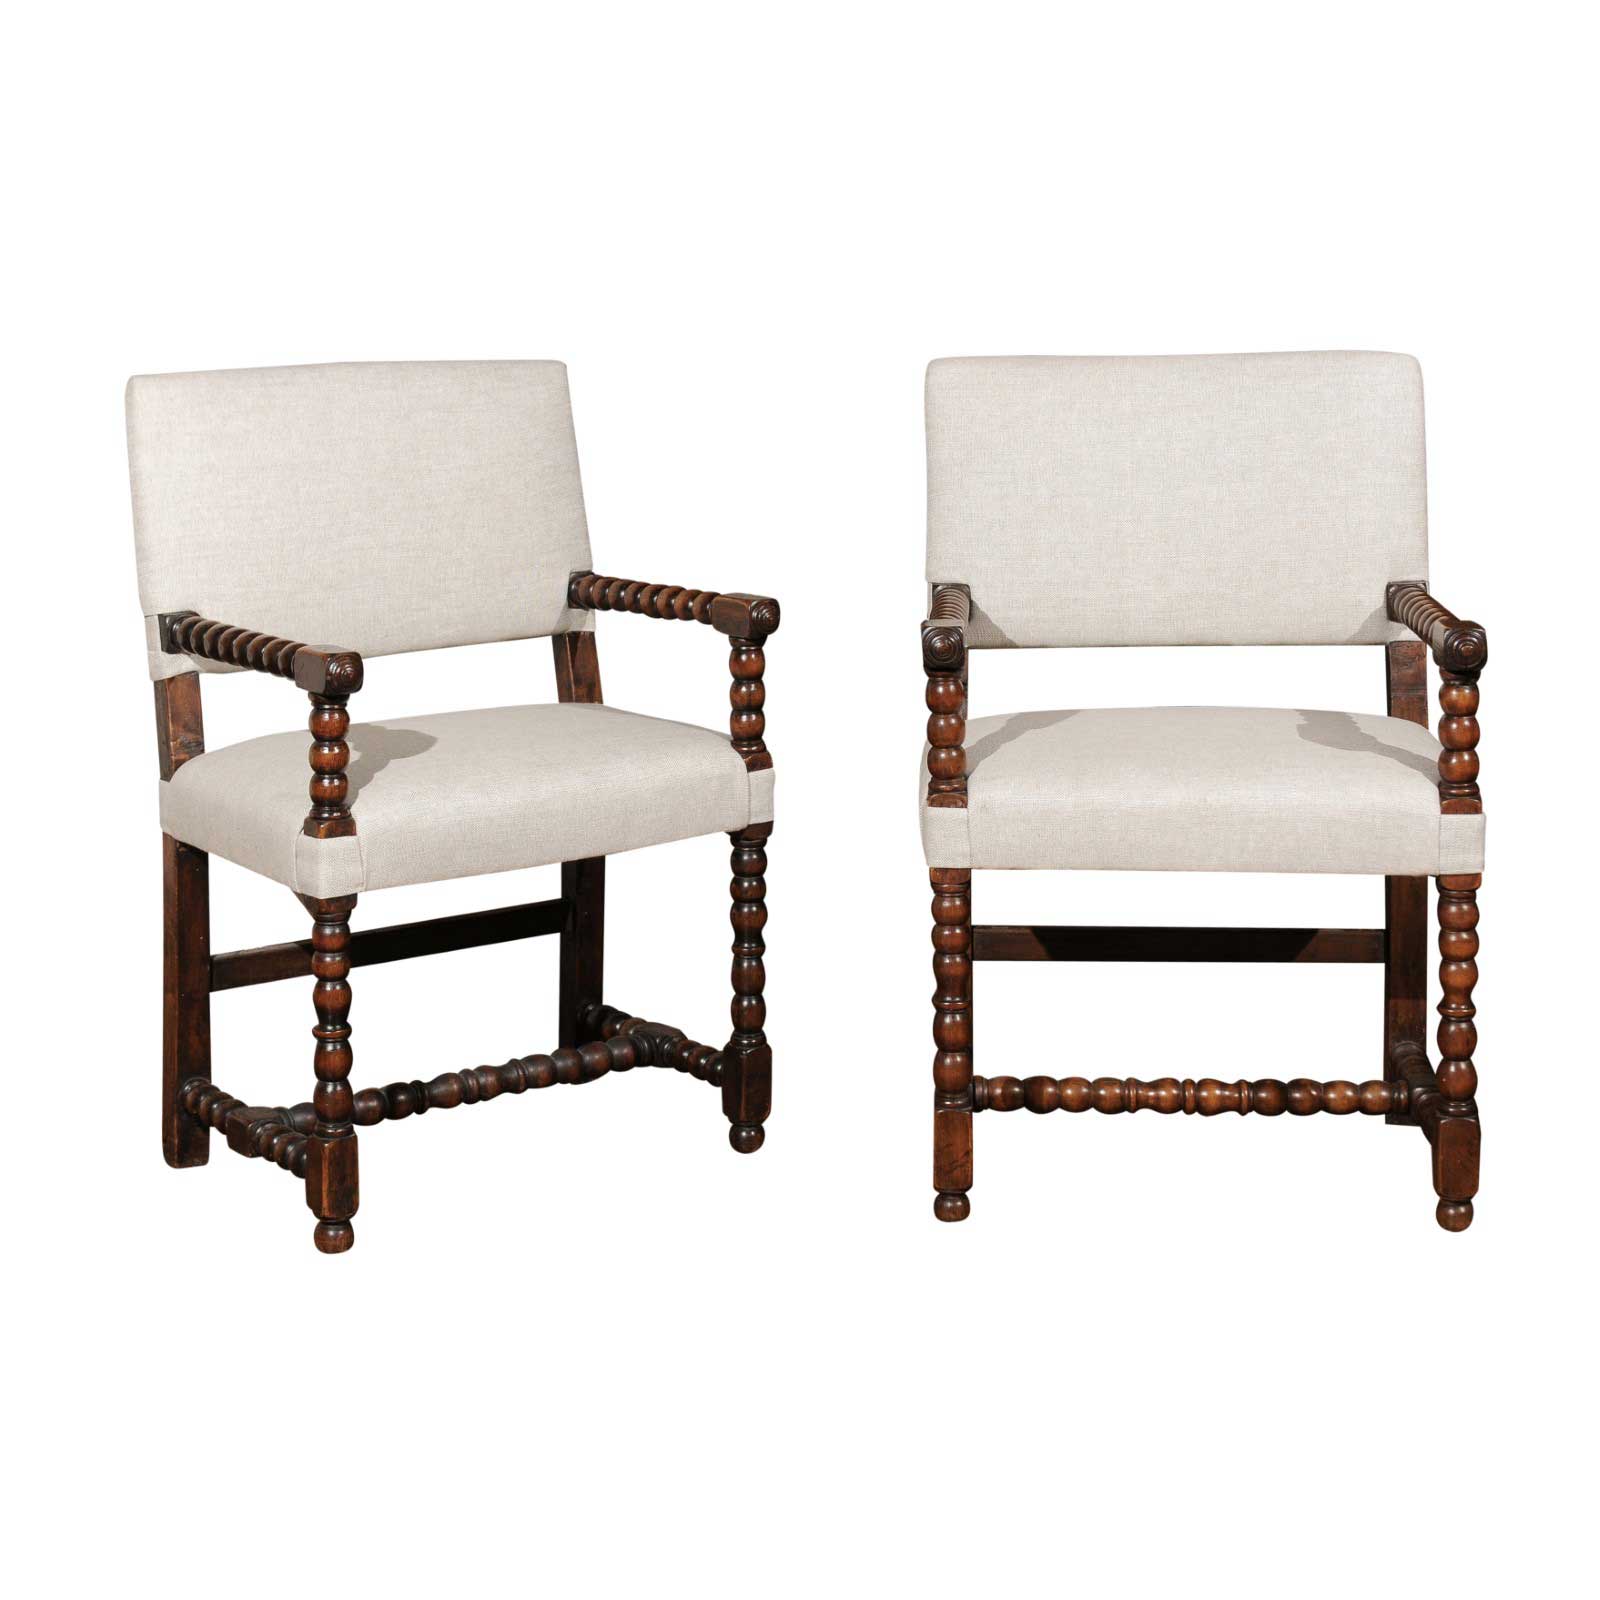 Pair Of Italian Baroque Style Oak Armchairs With Bobbin Legs And New